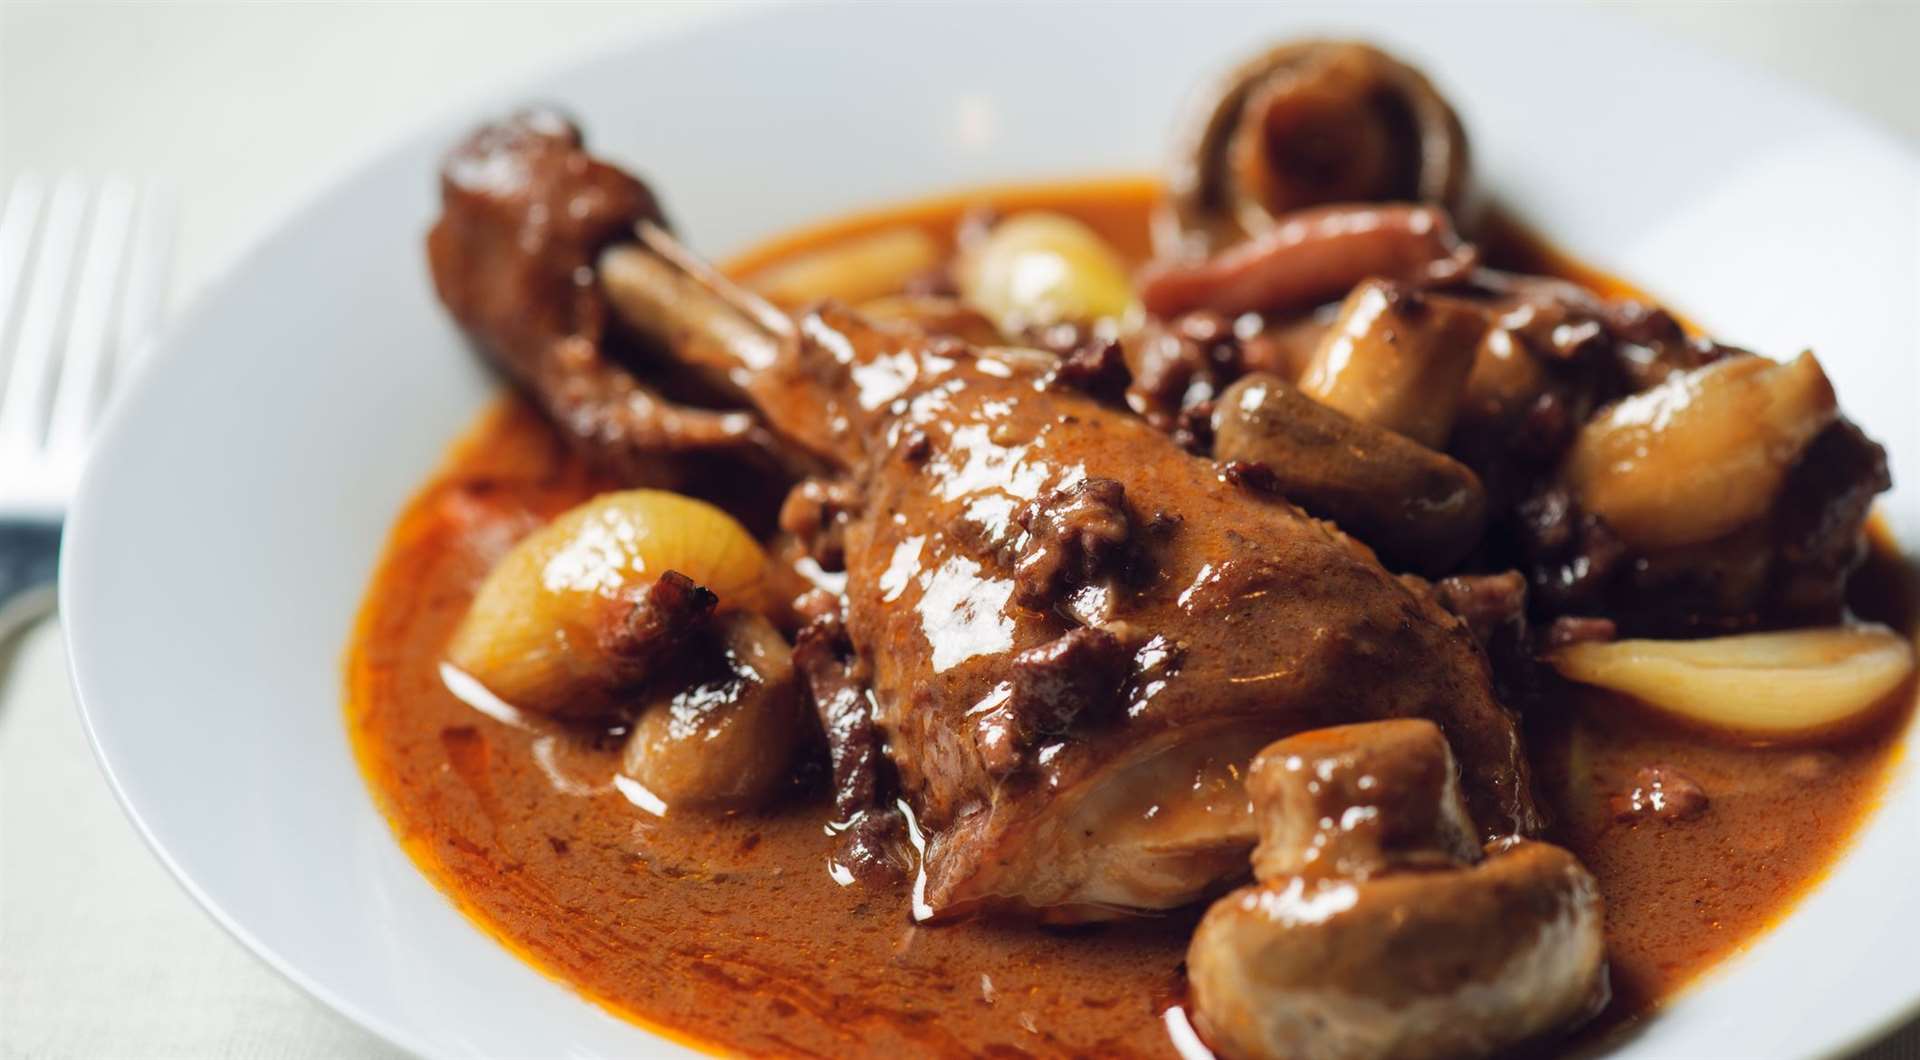 Those wanting to the very best in coq au vin can't go wrong at La Jacobine in Paris.